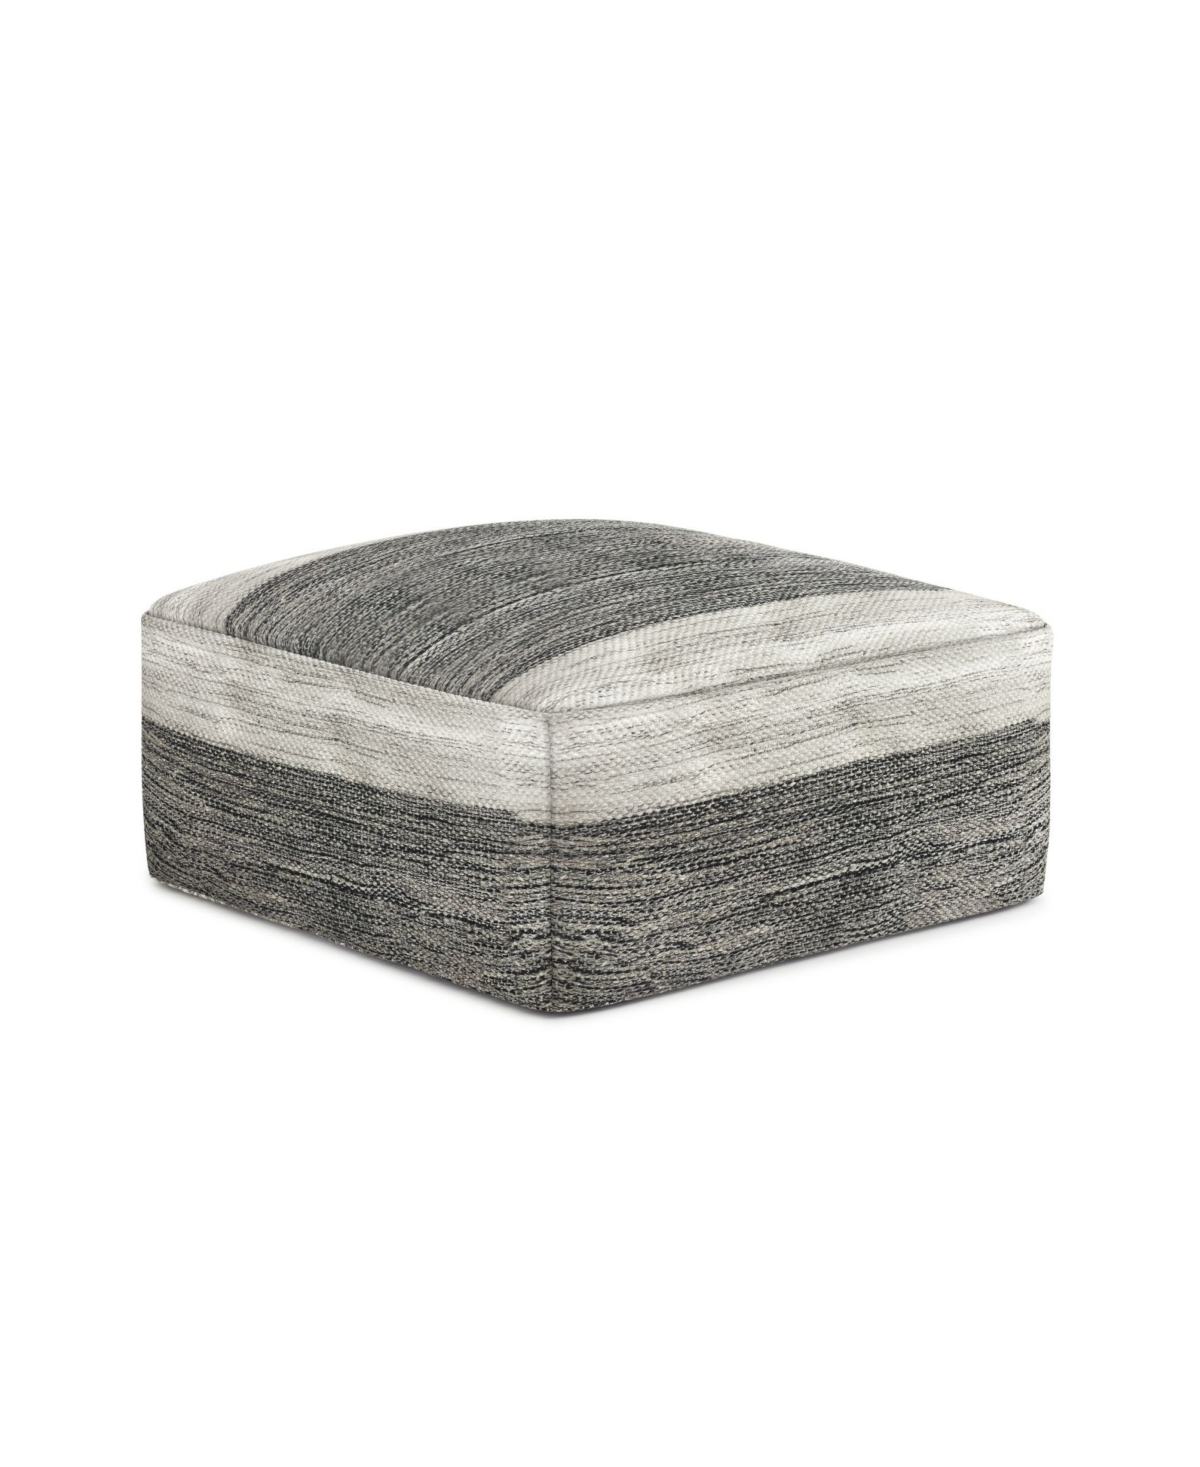 Macy's Mathis Square Woven Outdoor And Indoor Pouf In Gray And White